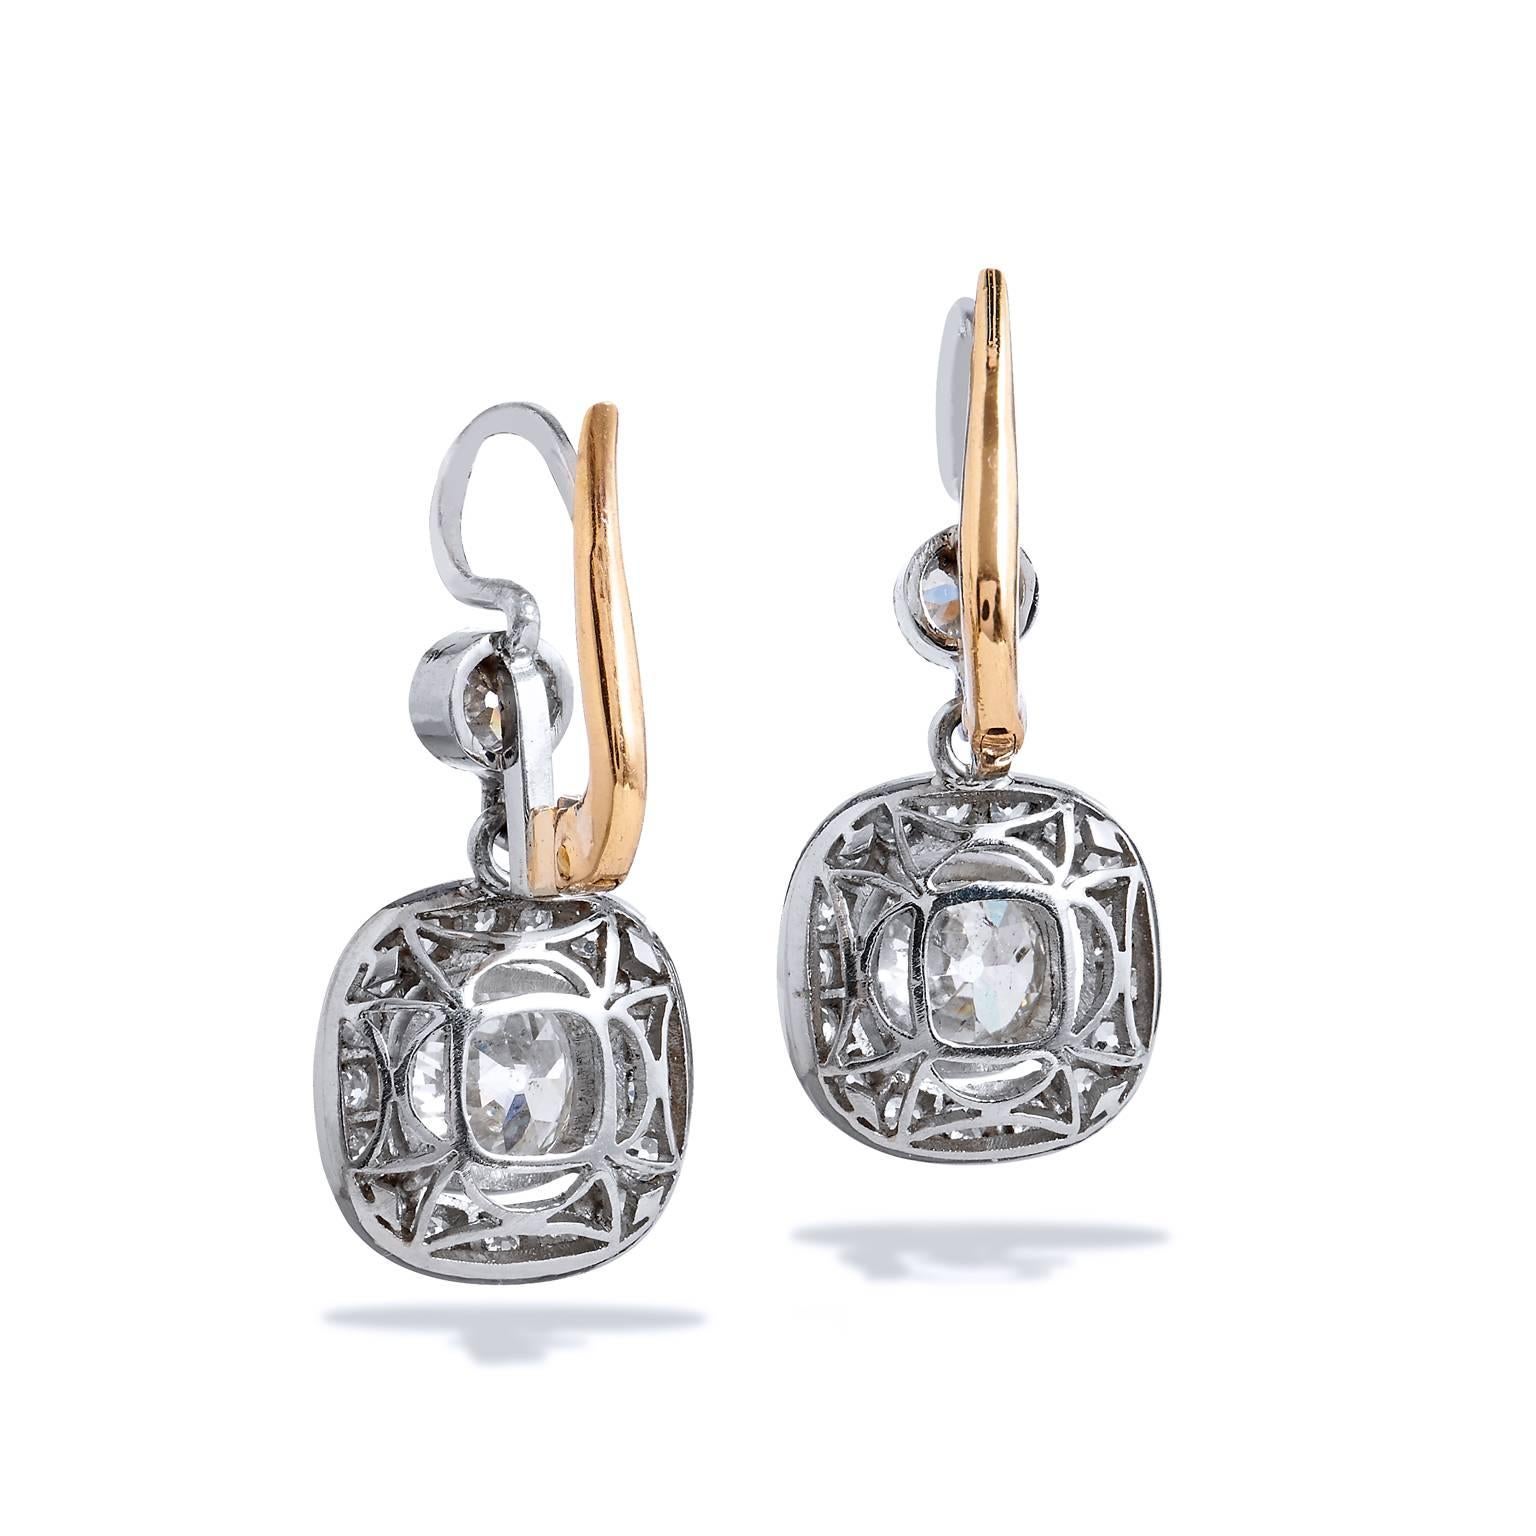 This set of Art Deco style earrings are handcrafted in platinum and feature a unique design touch with 18kt yellow gold on the backside. The pair hosts a total of 1.96ct old mind cushion cut diamonds.